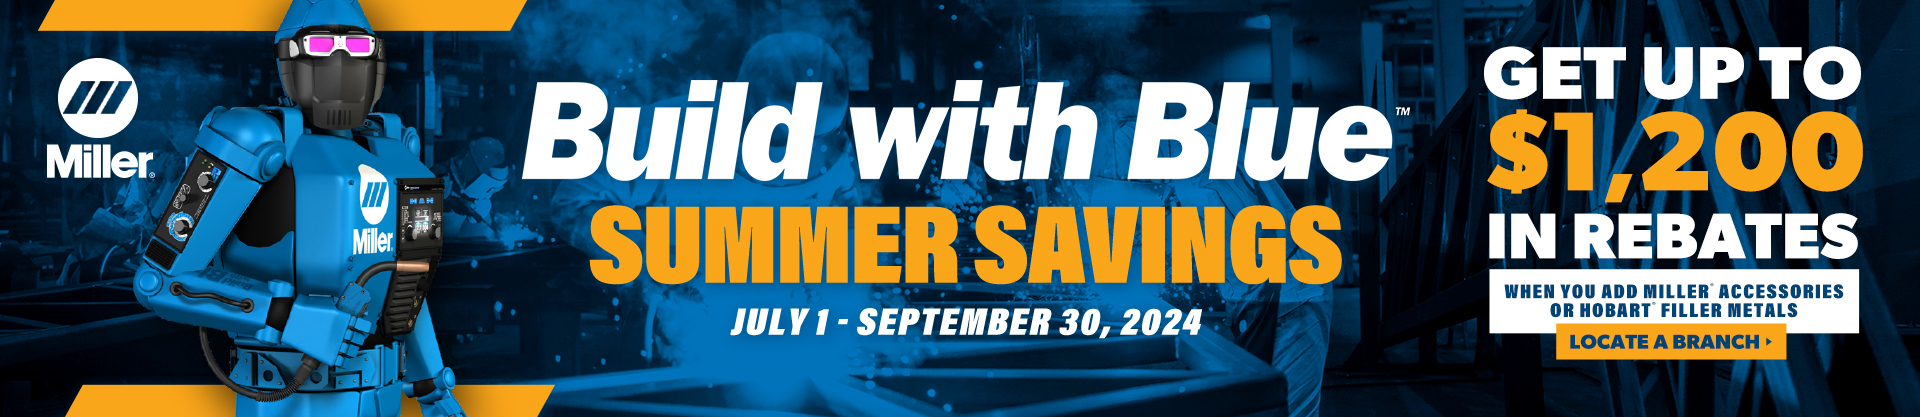 Miller Build with Blue Summer Savings Promotion!